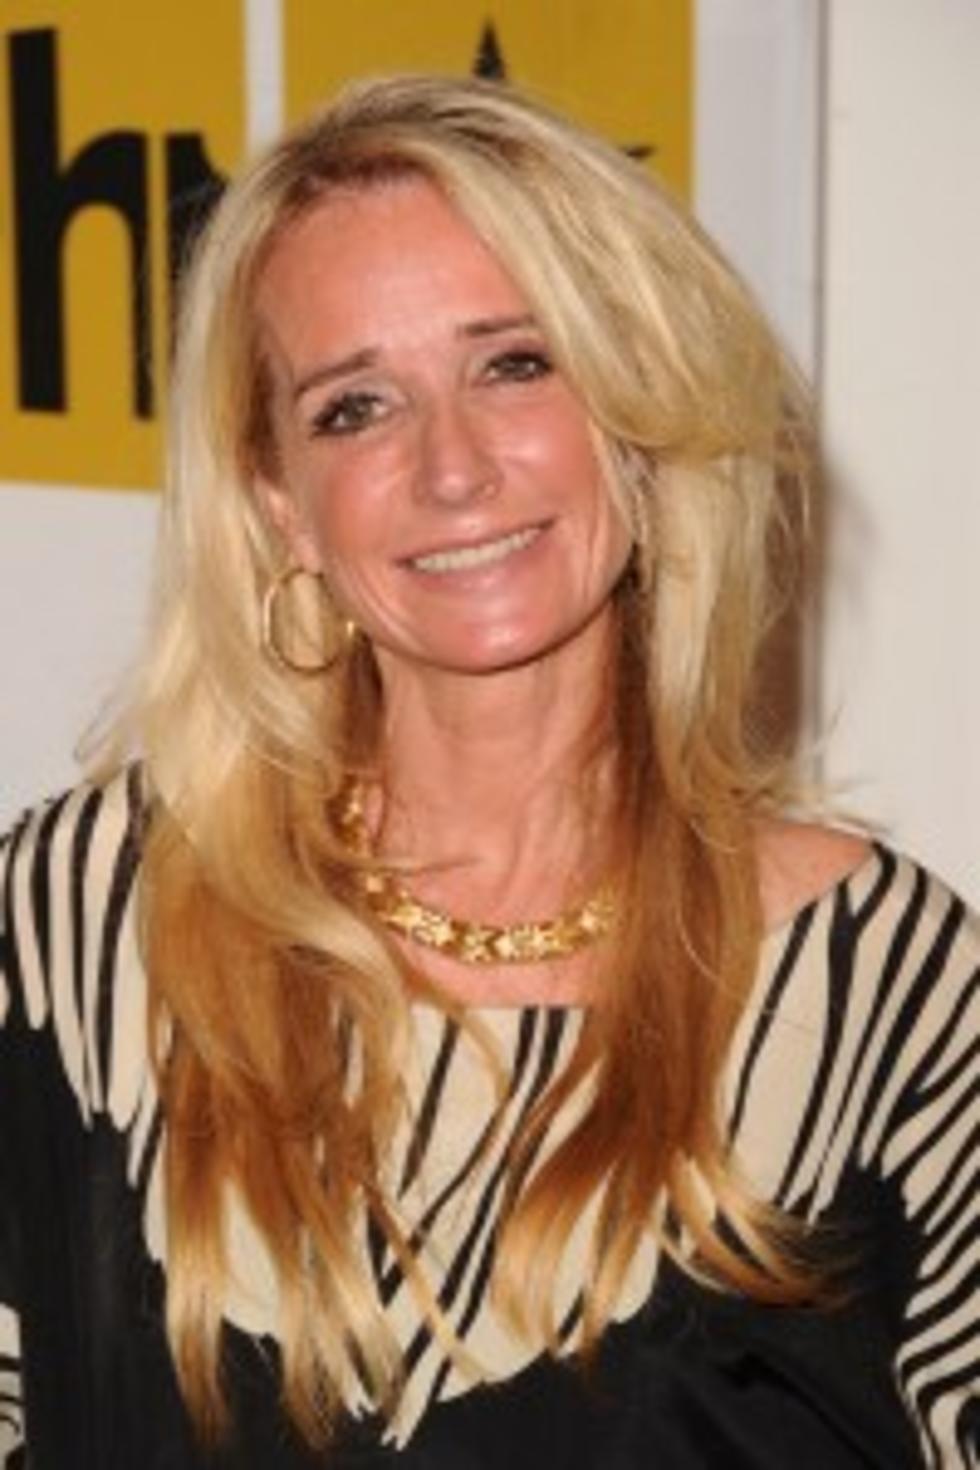 &#8216;Real Housewives Of Beverly Hills&#8217; Kim Richards Alledgedly Heads To Rehab [VIDEO]